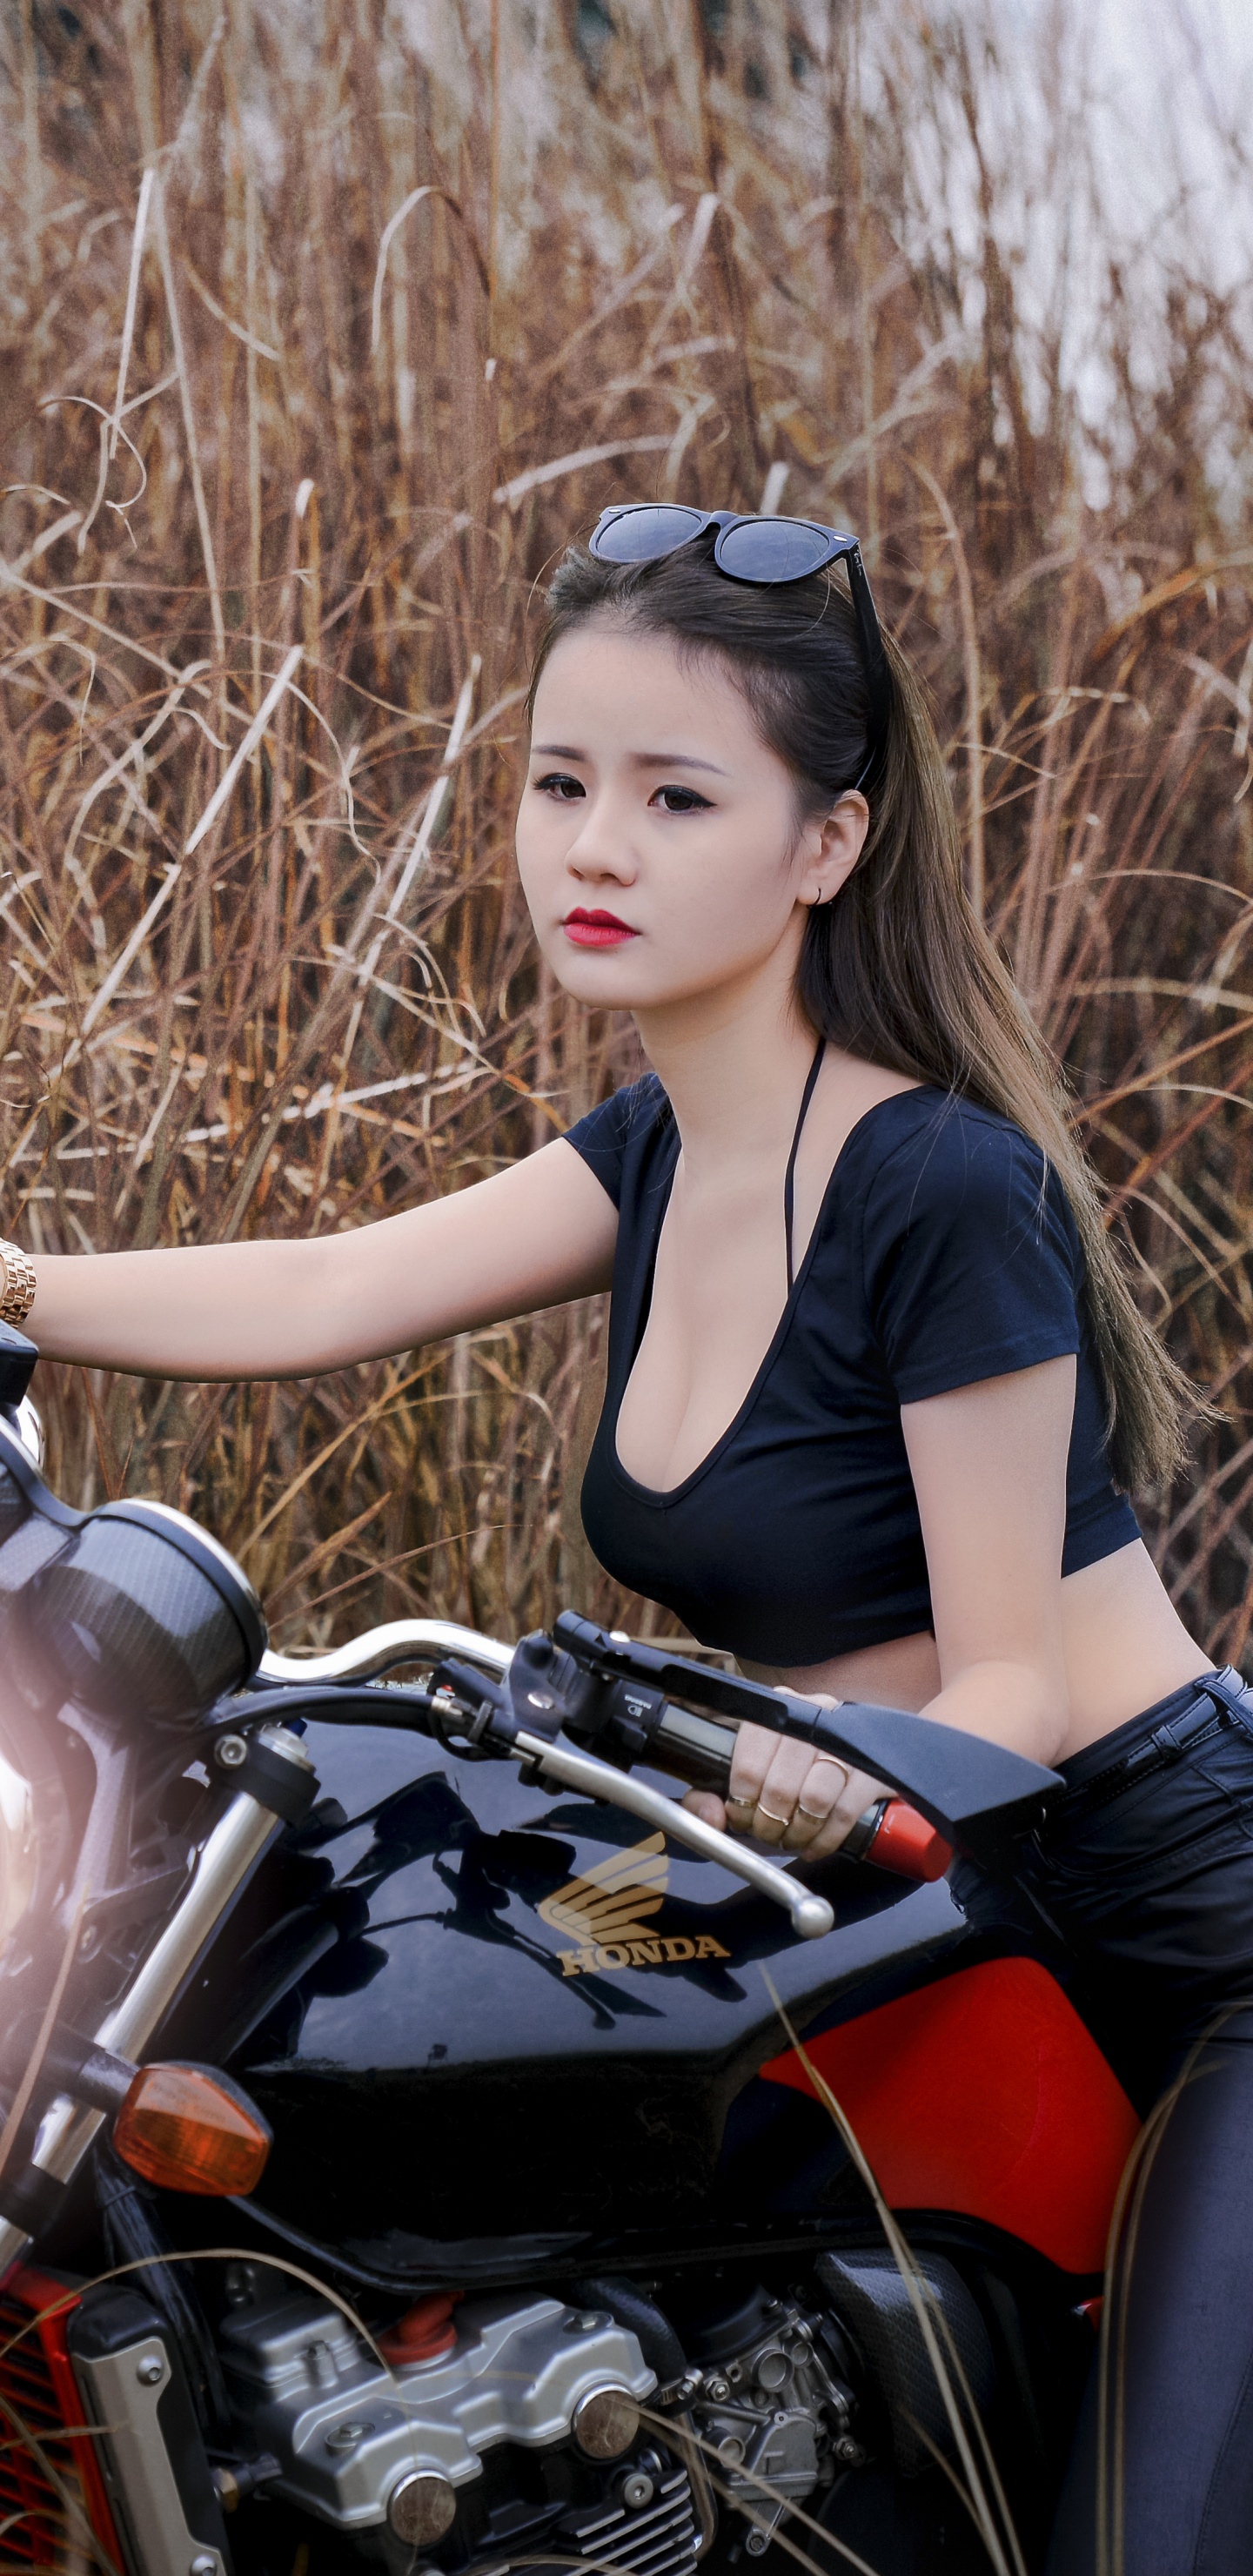 Woman in Black Tank Top and Black Leggings Sitting on Red and Black Motorcycle. Wallpaper in 1440x2960 Resolution